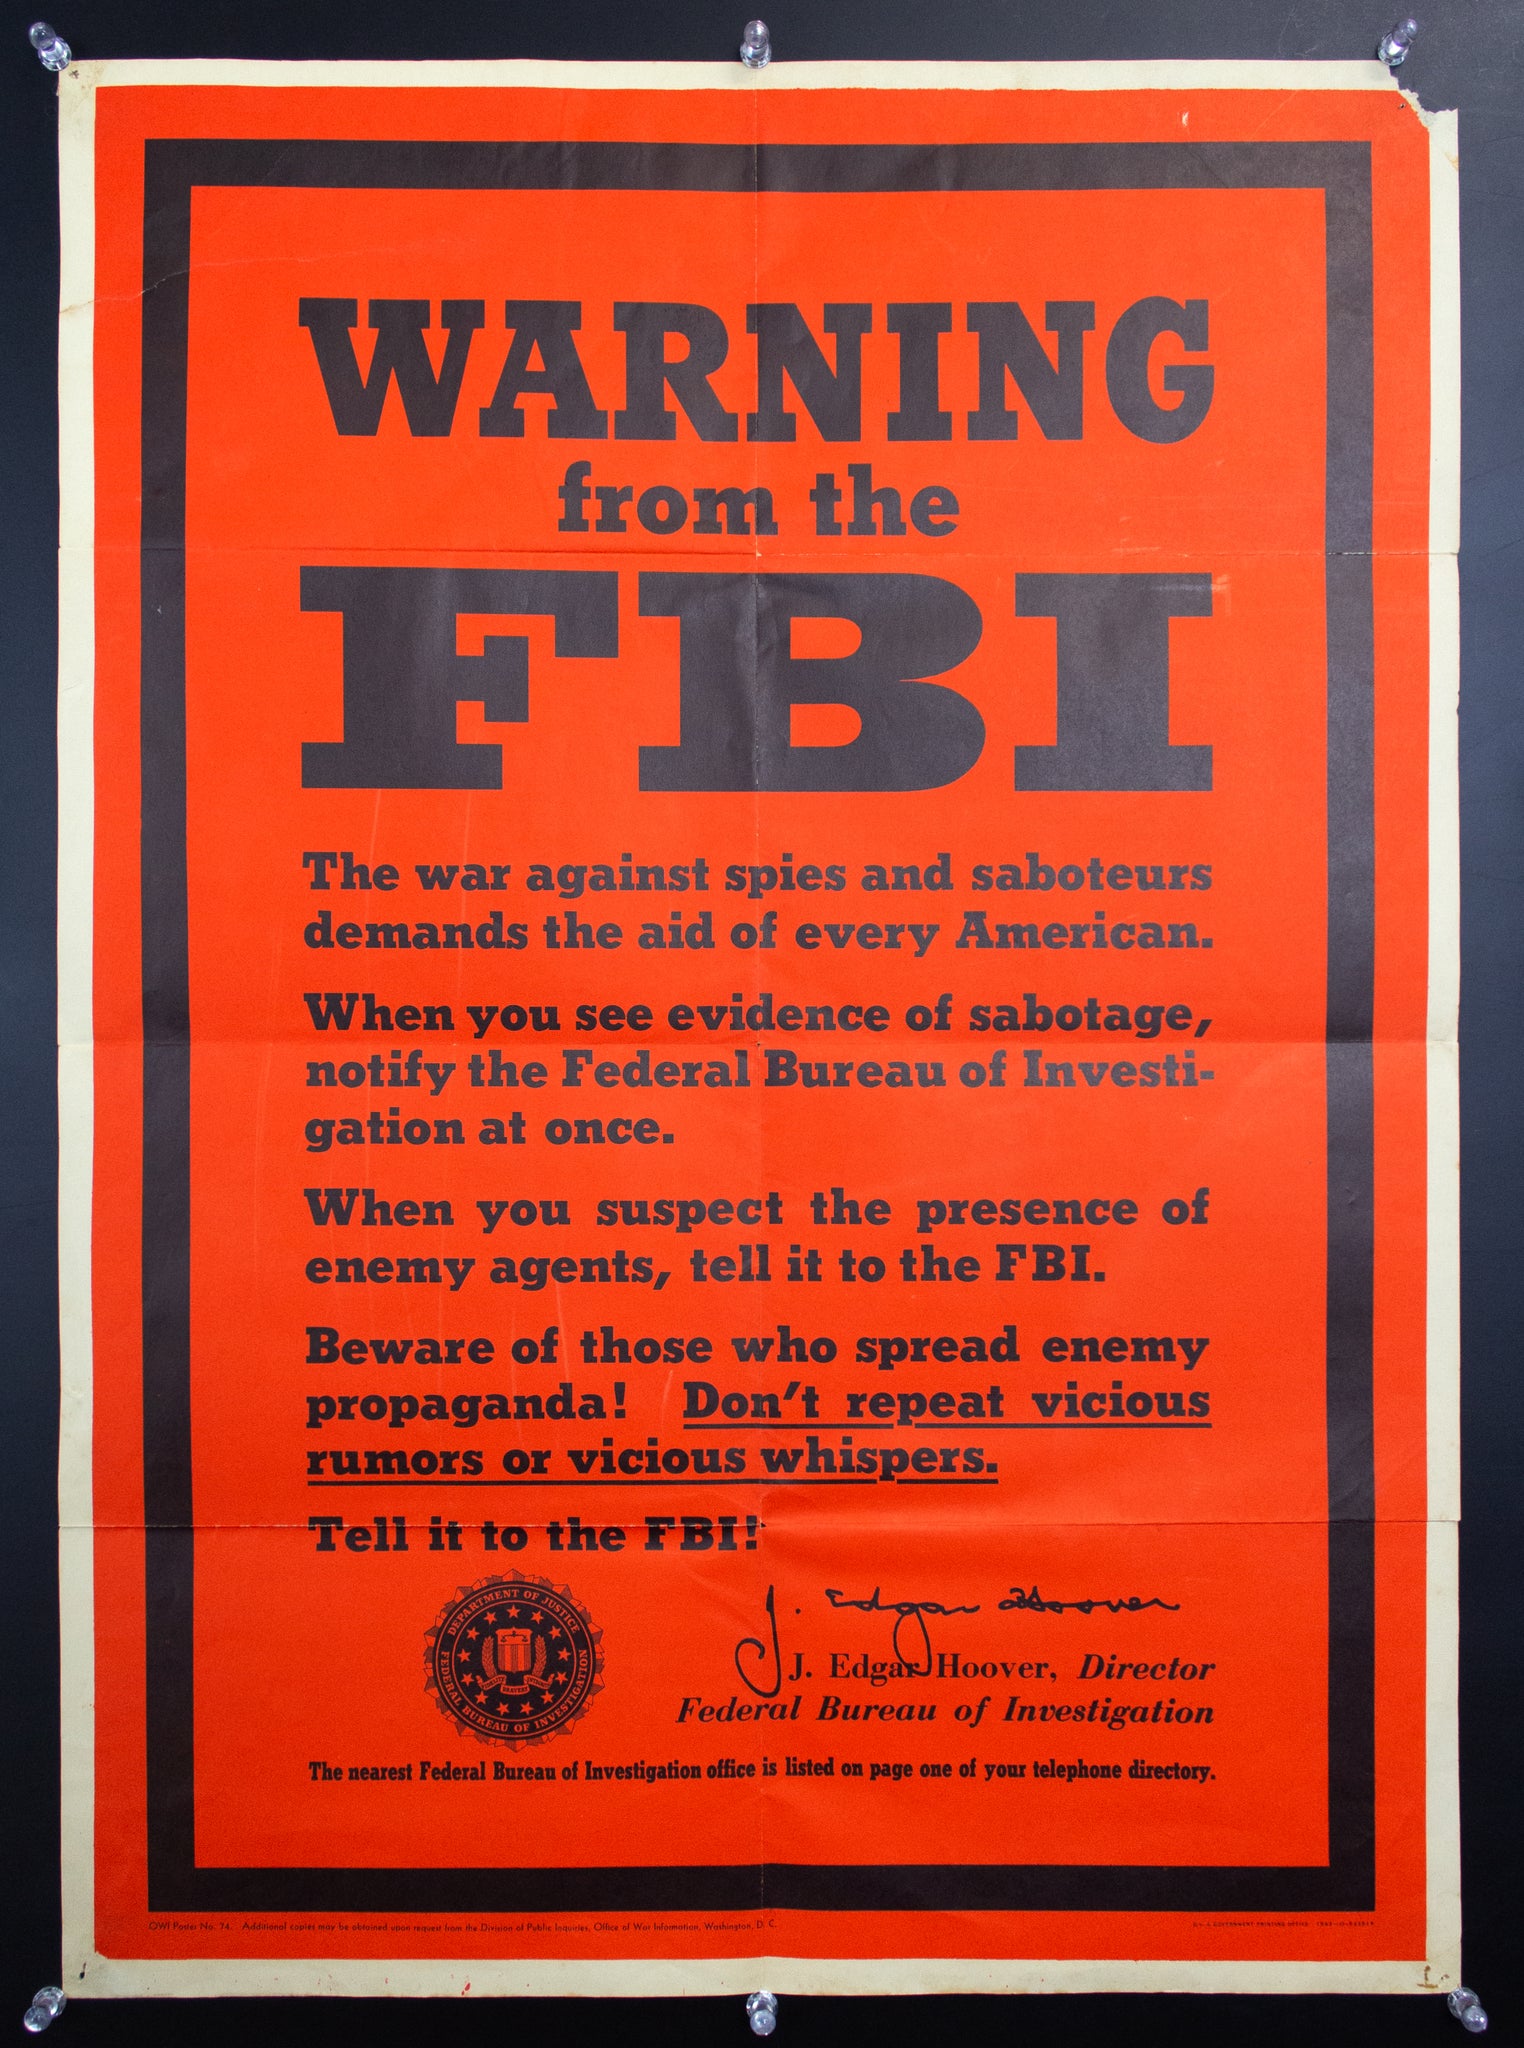 1943 Warning From The FBI Spies Saboteurs Enemy Agents J Edgar Hoover WWII